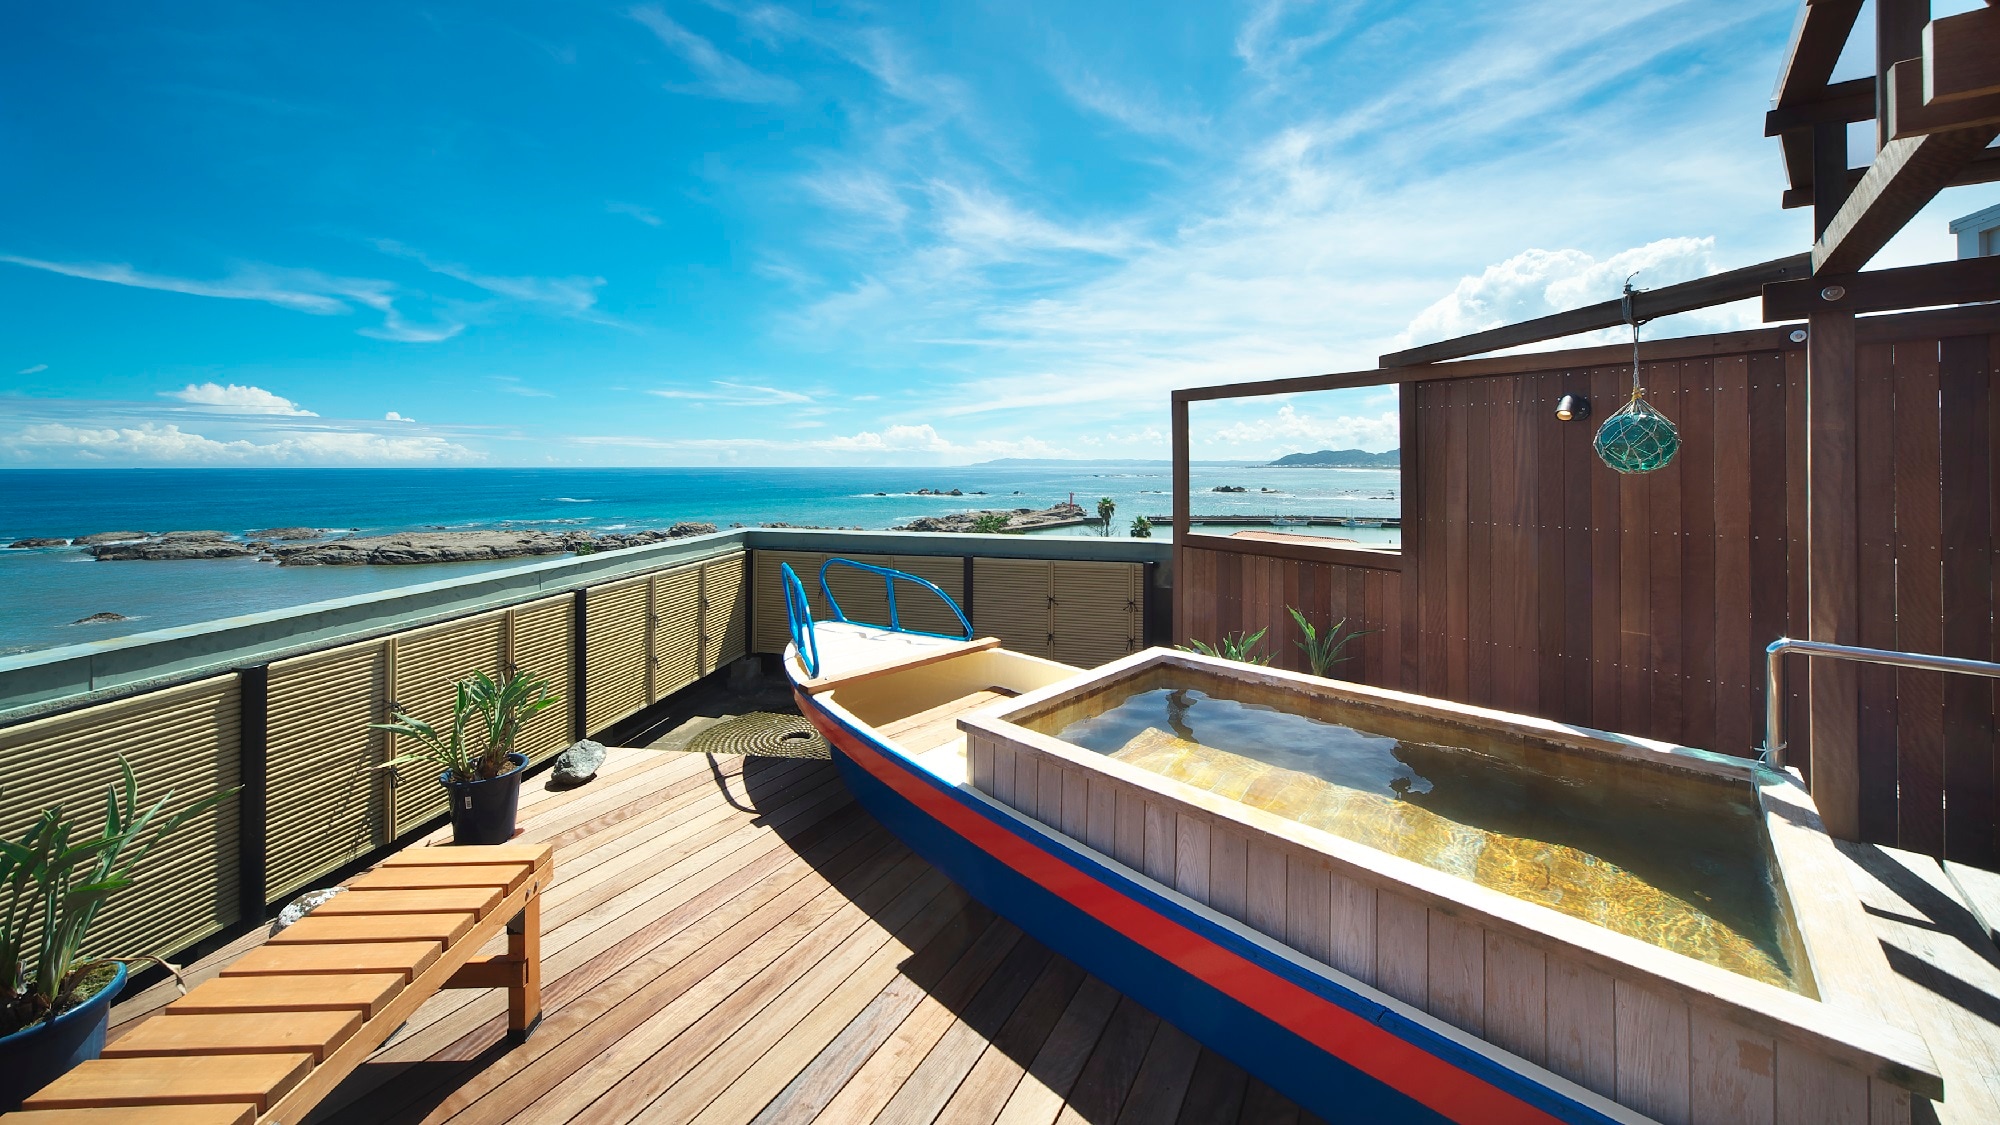 Private open-air bath "Fune" with a panoramic view of the Boso Peninsula and the Pacific Ocean